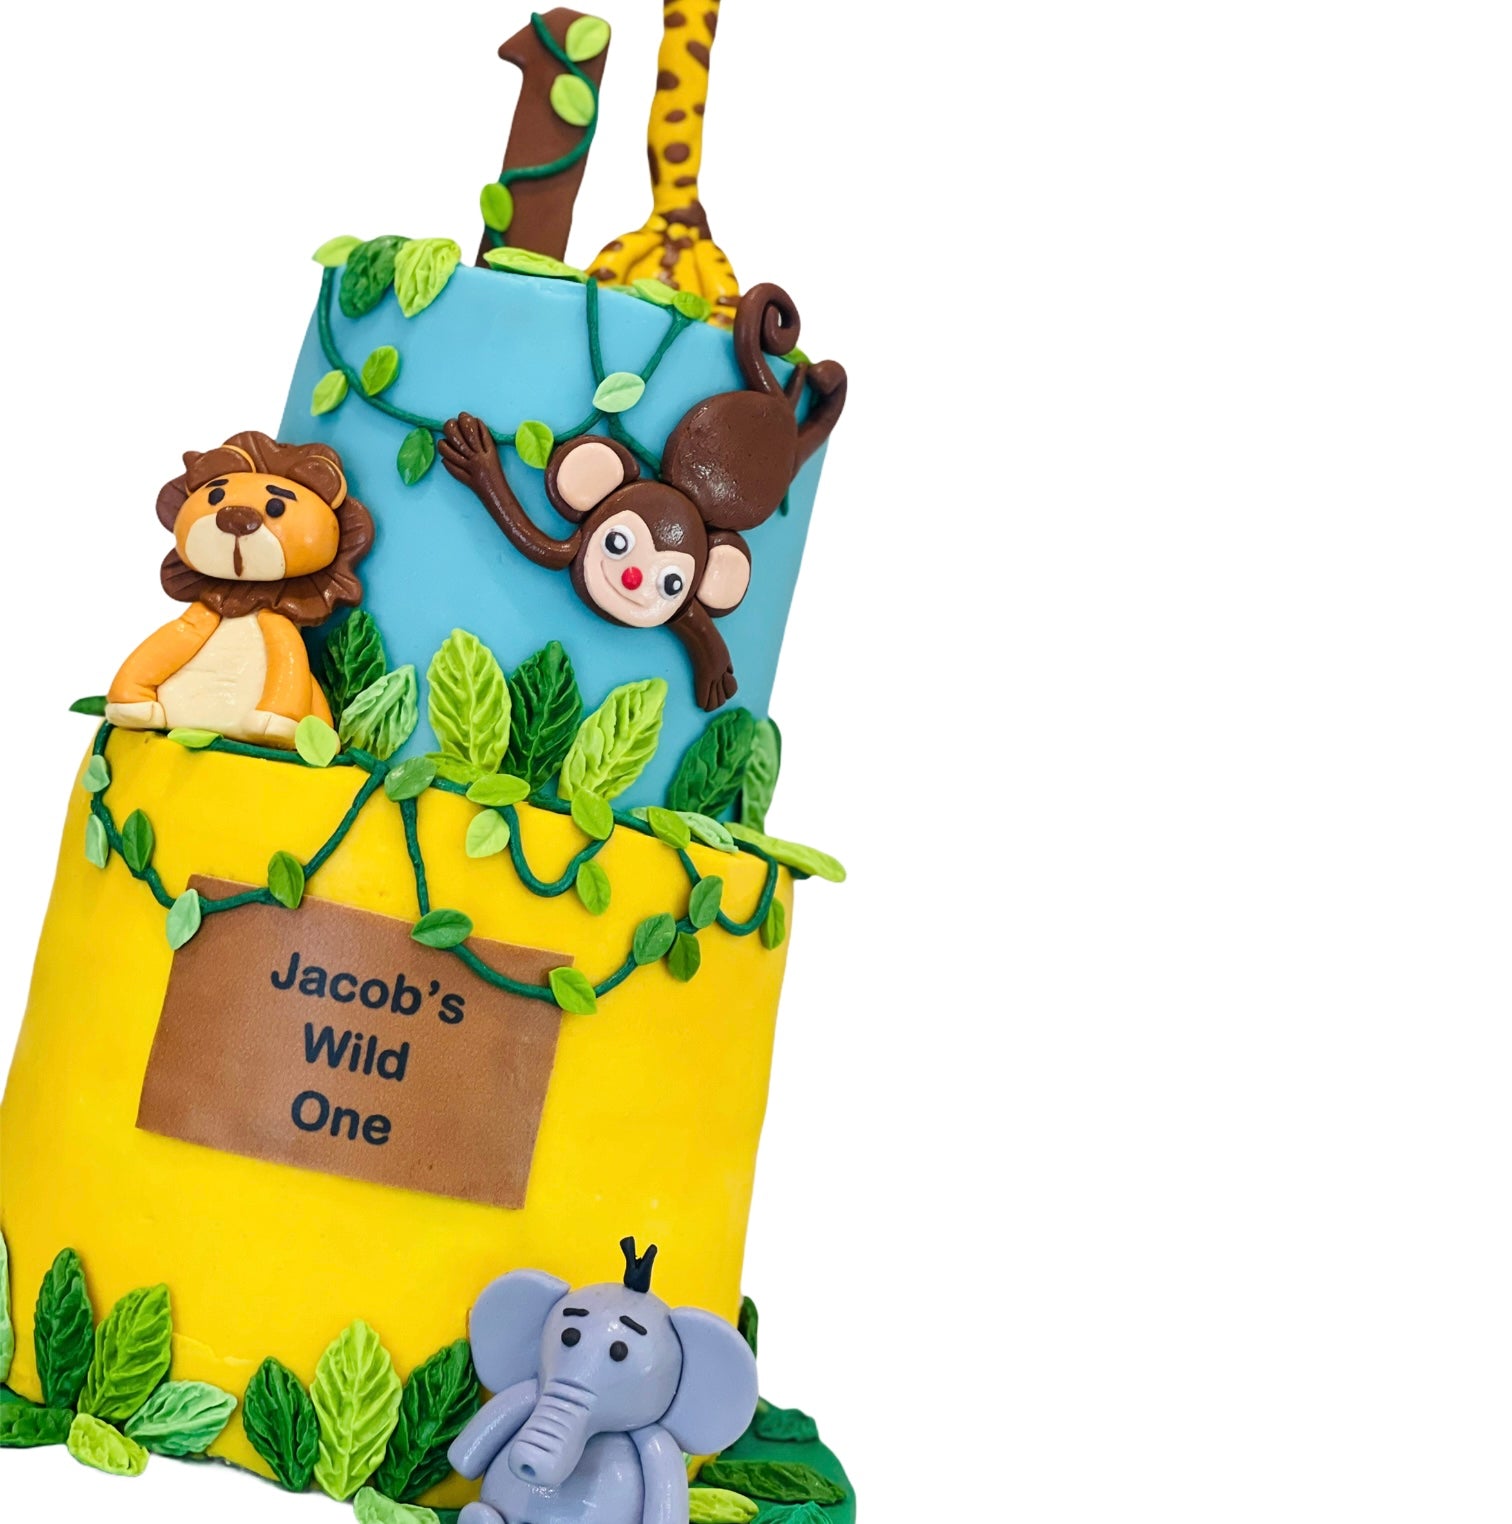 Amazon.com: Jungle Birthday Cake Topper Girl, Jungle Birthday Party  Supplies for Girls, 25pcs Safari Animal Cake & Cupcake Toppers for Wild  One, Two Wild Birthday : Grocery & Gourmet Food